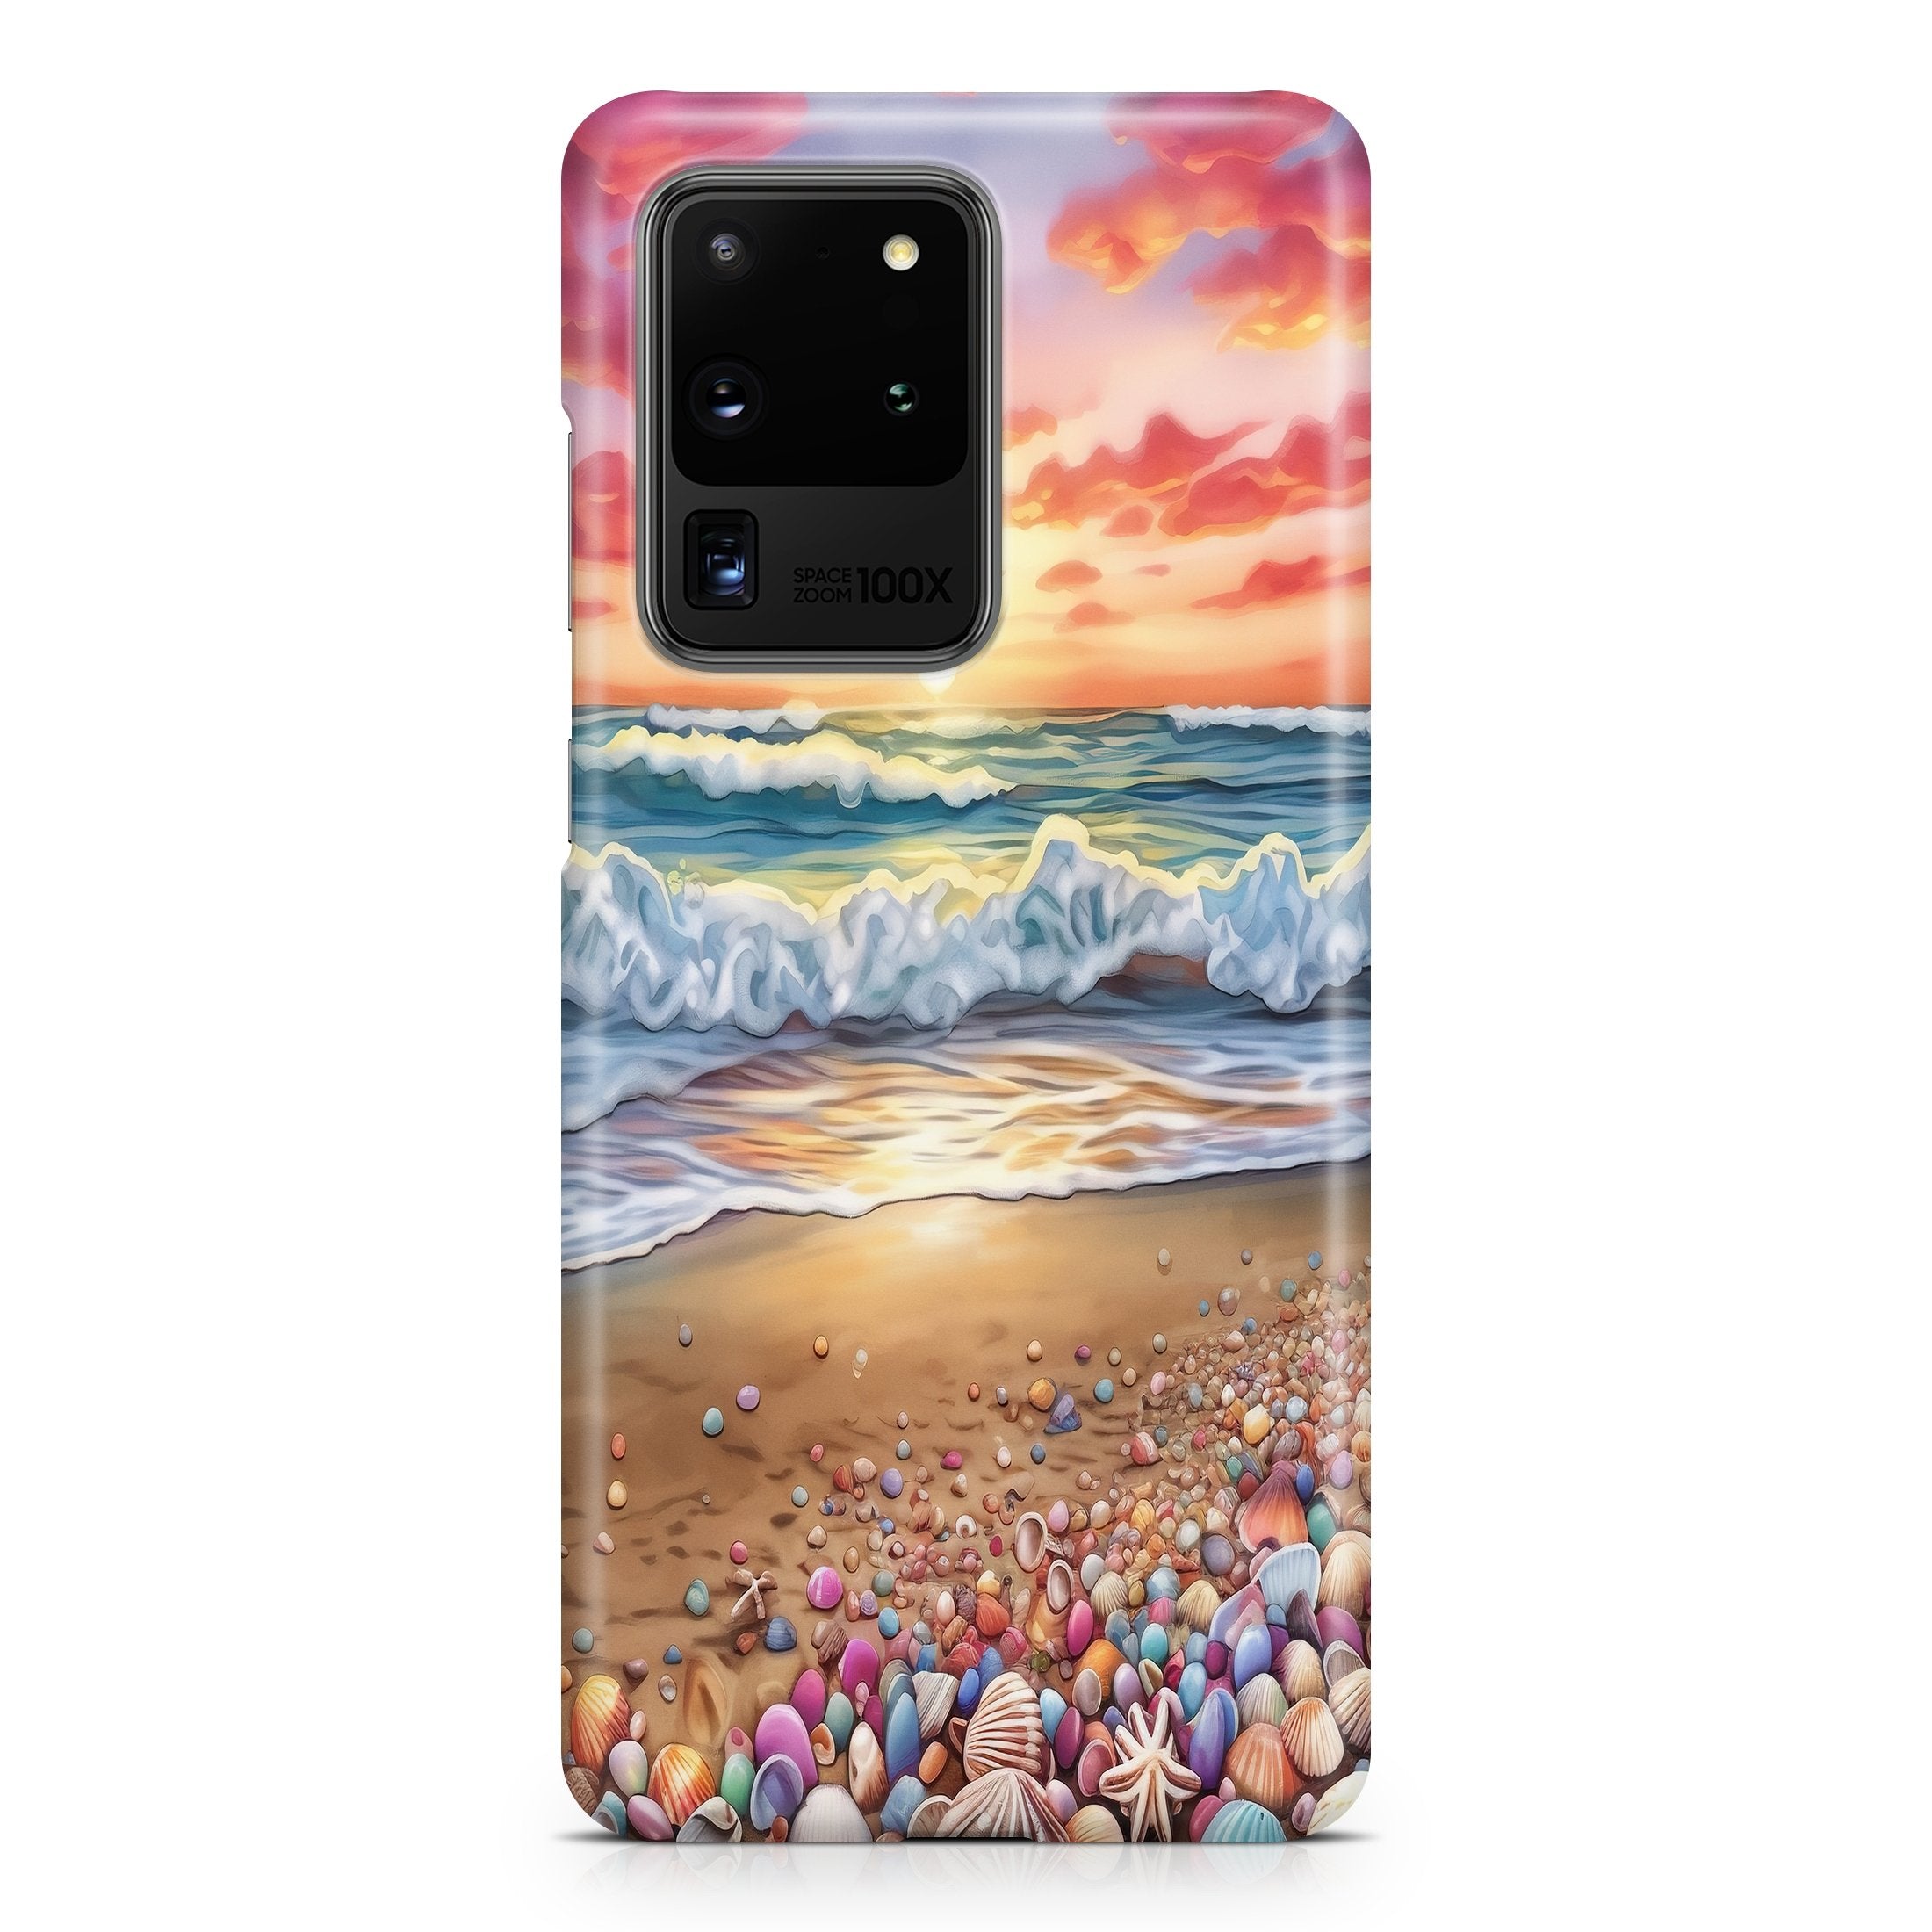 Summertime Shoreline - Samsung phone case designs by CaseSwagger